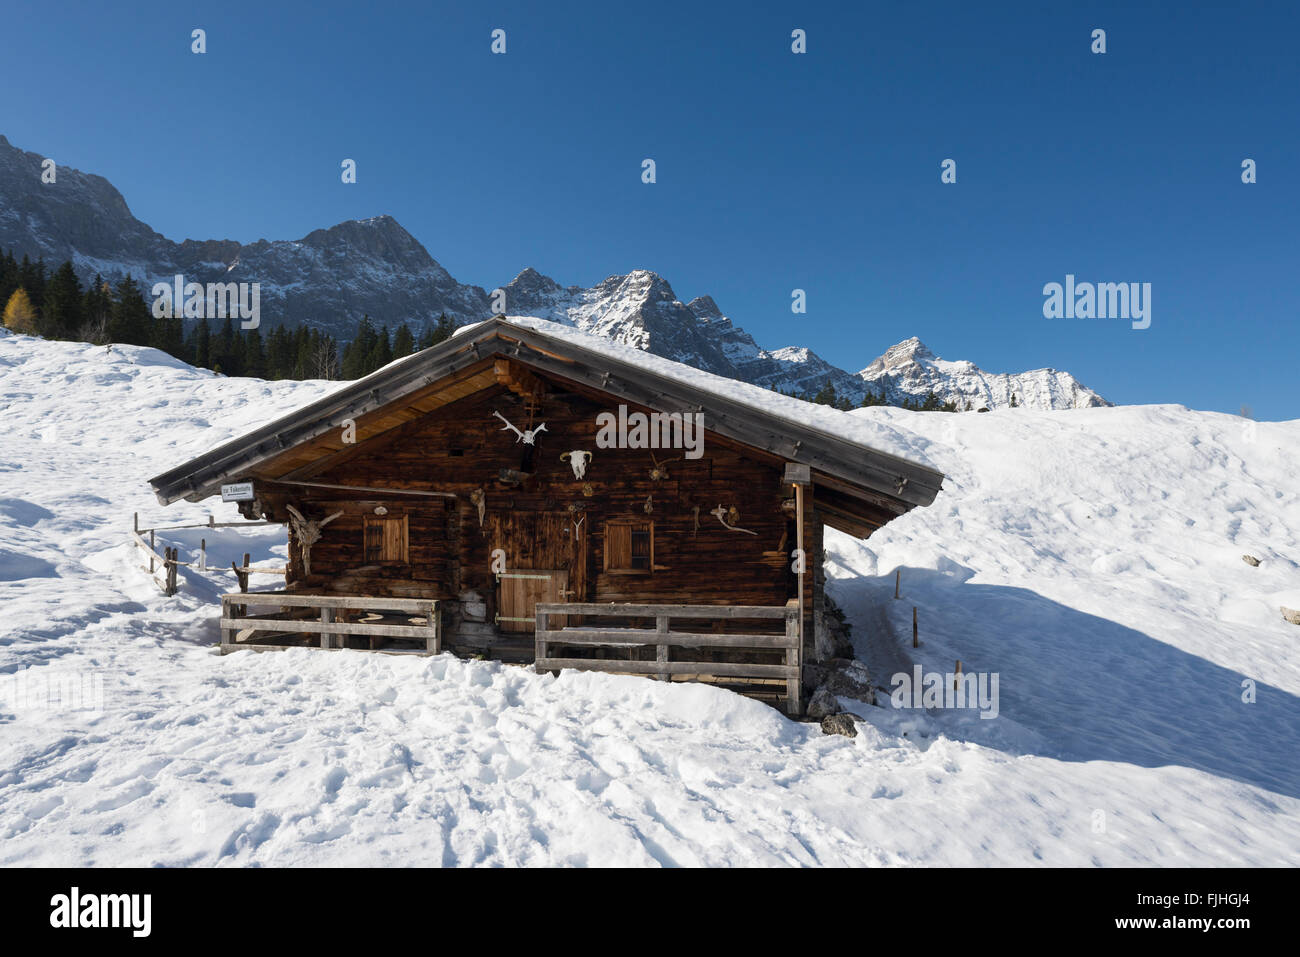 Snow covered wooden alpine chalet on the Ladiz alp with the cliffs of the Karwendel mountains in bright sunshine,Tirol,Austria Stock Photo